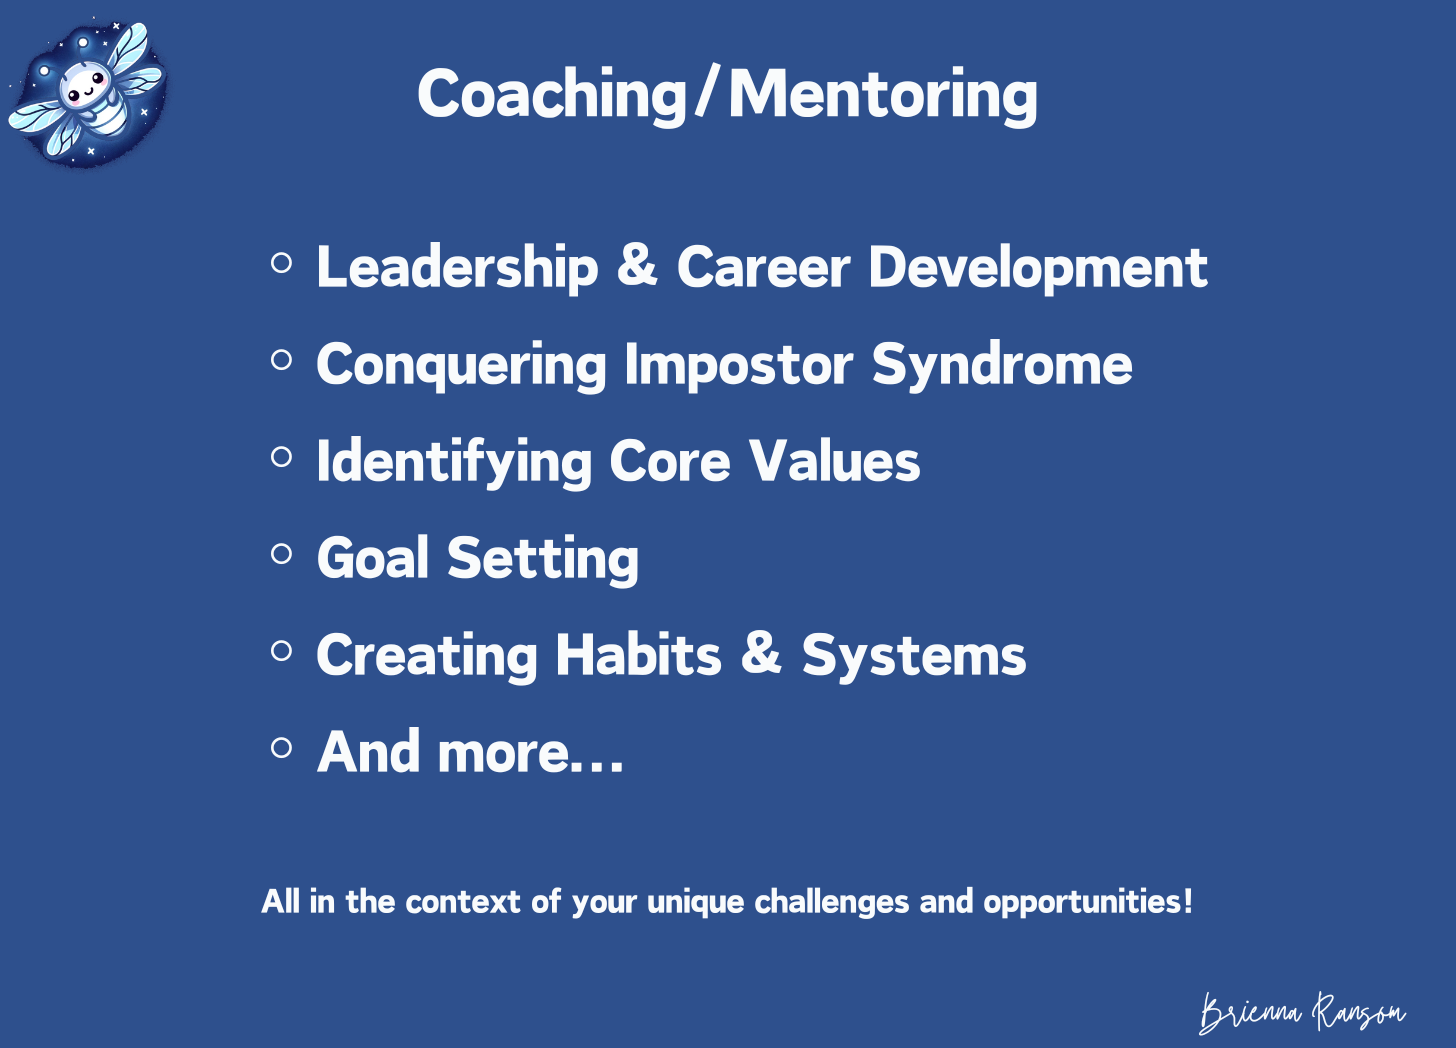 Coaching/mentoring: ◦Leadership & Career Development ◦Conquering Impostor Syndrome ◦Identifying Core Values ◦Goal Setting ◦Creating Habits & Systems ◦And more...